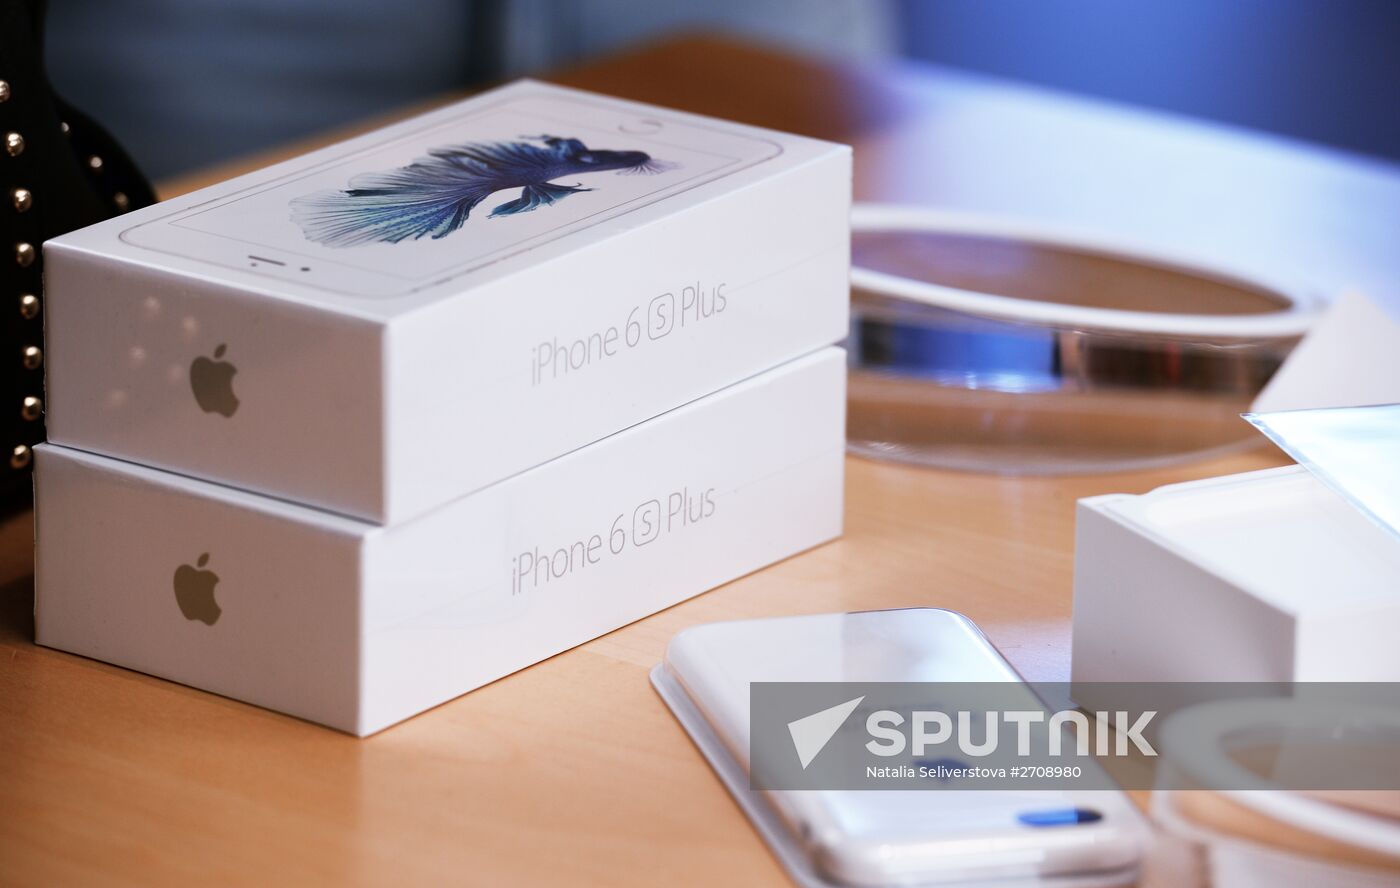 Selling iPhone 6s and iPhone 6s Plus smartphones